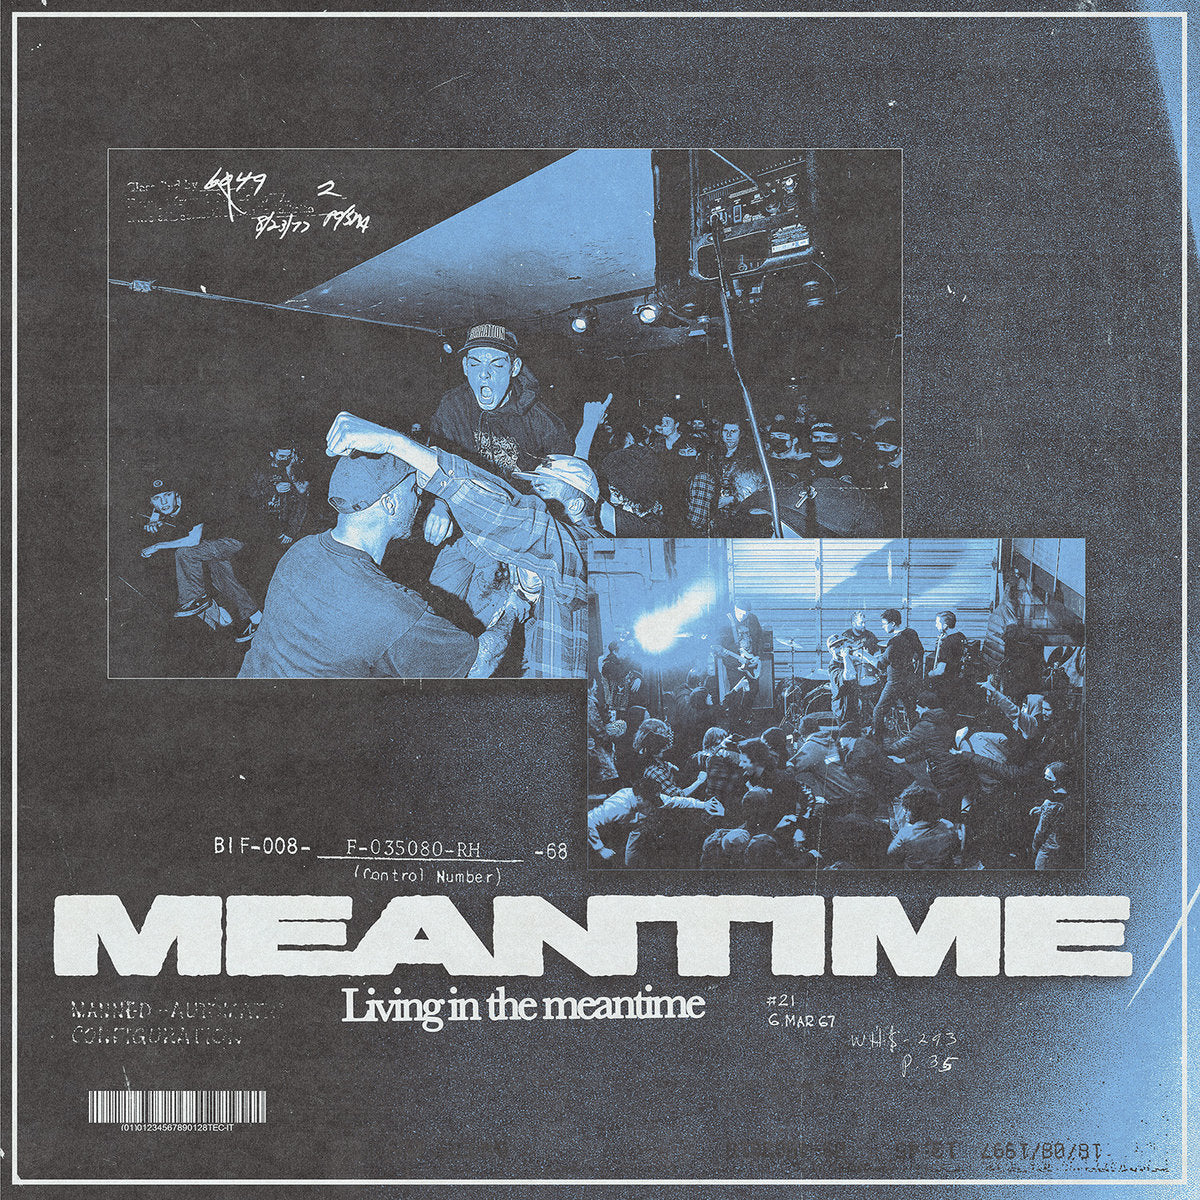 Meantime "Living In The Meantime" LP